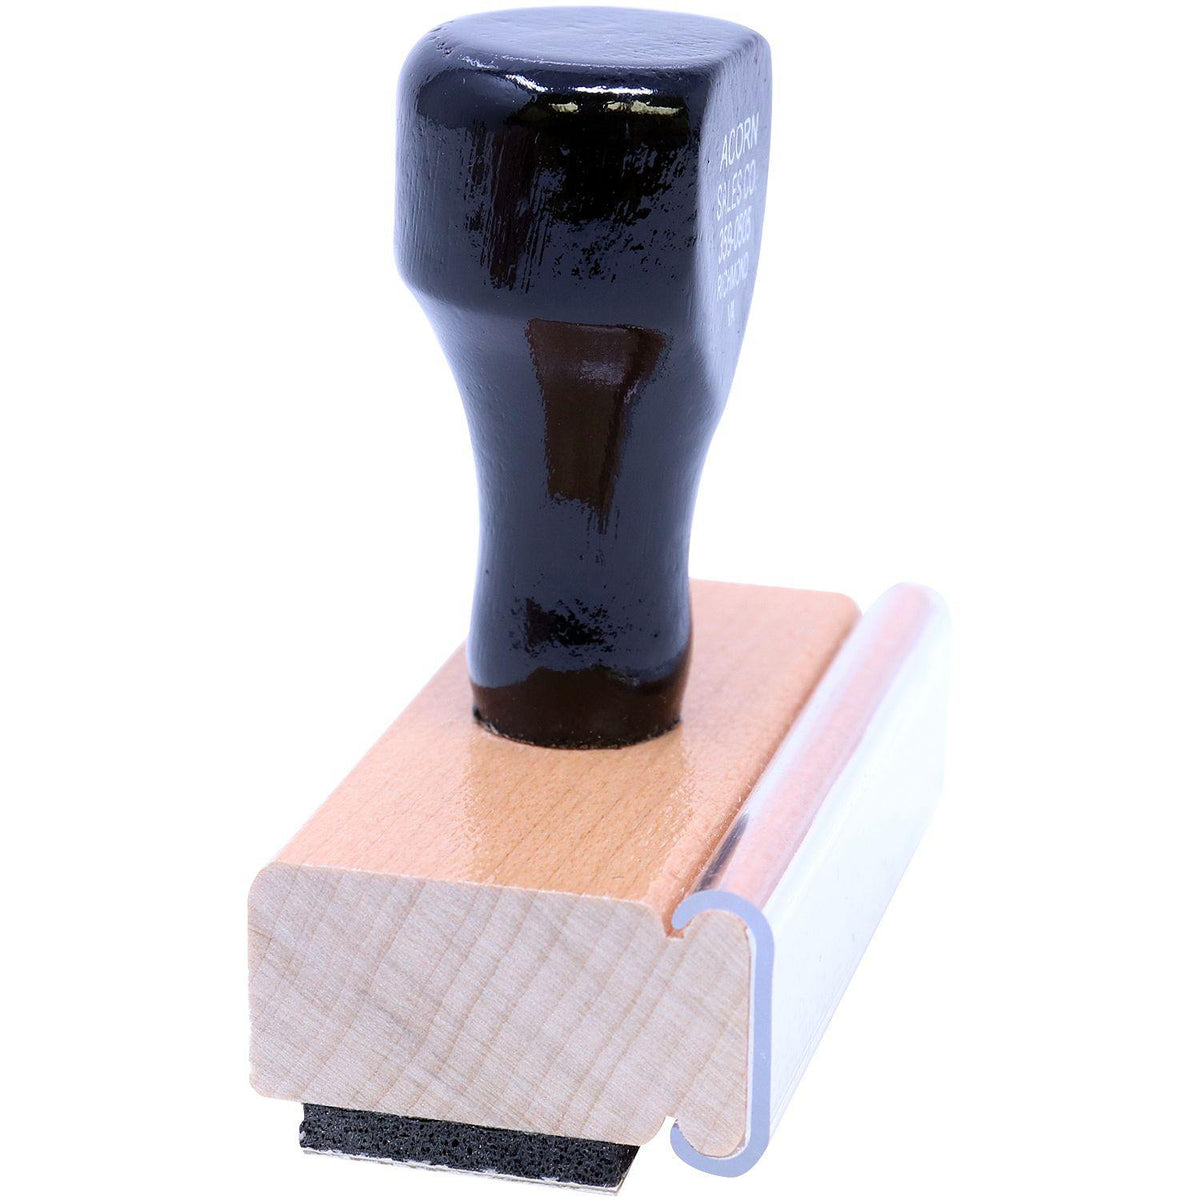 Side View of Large Deposition Exhibit Rubber Stamp at an Angle